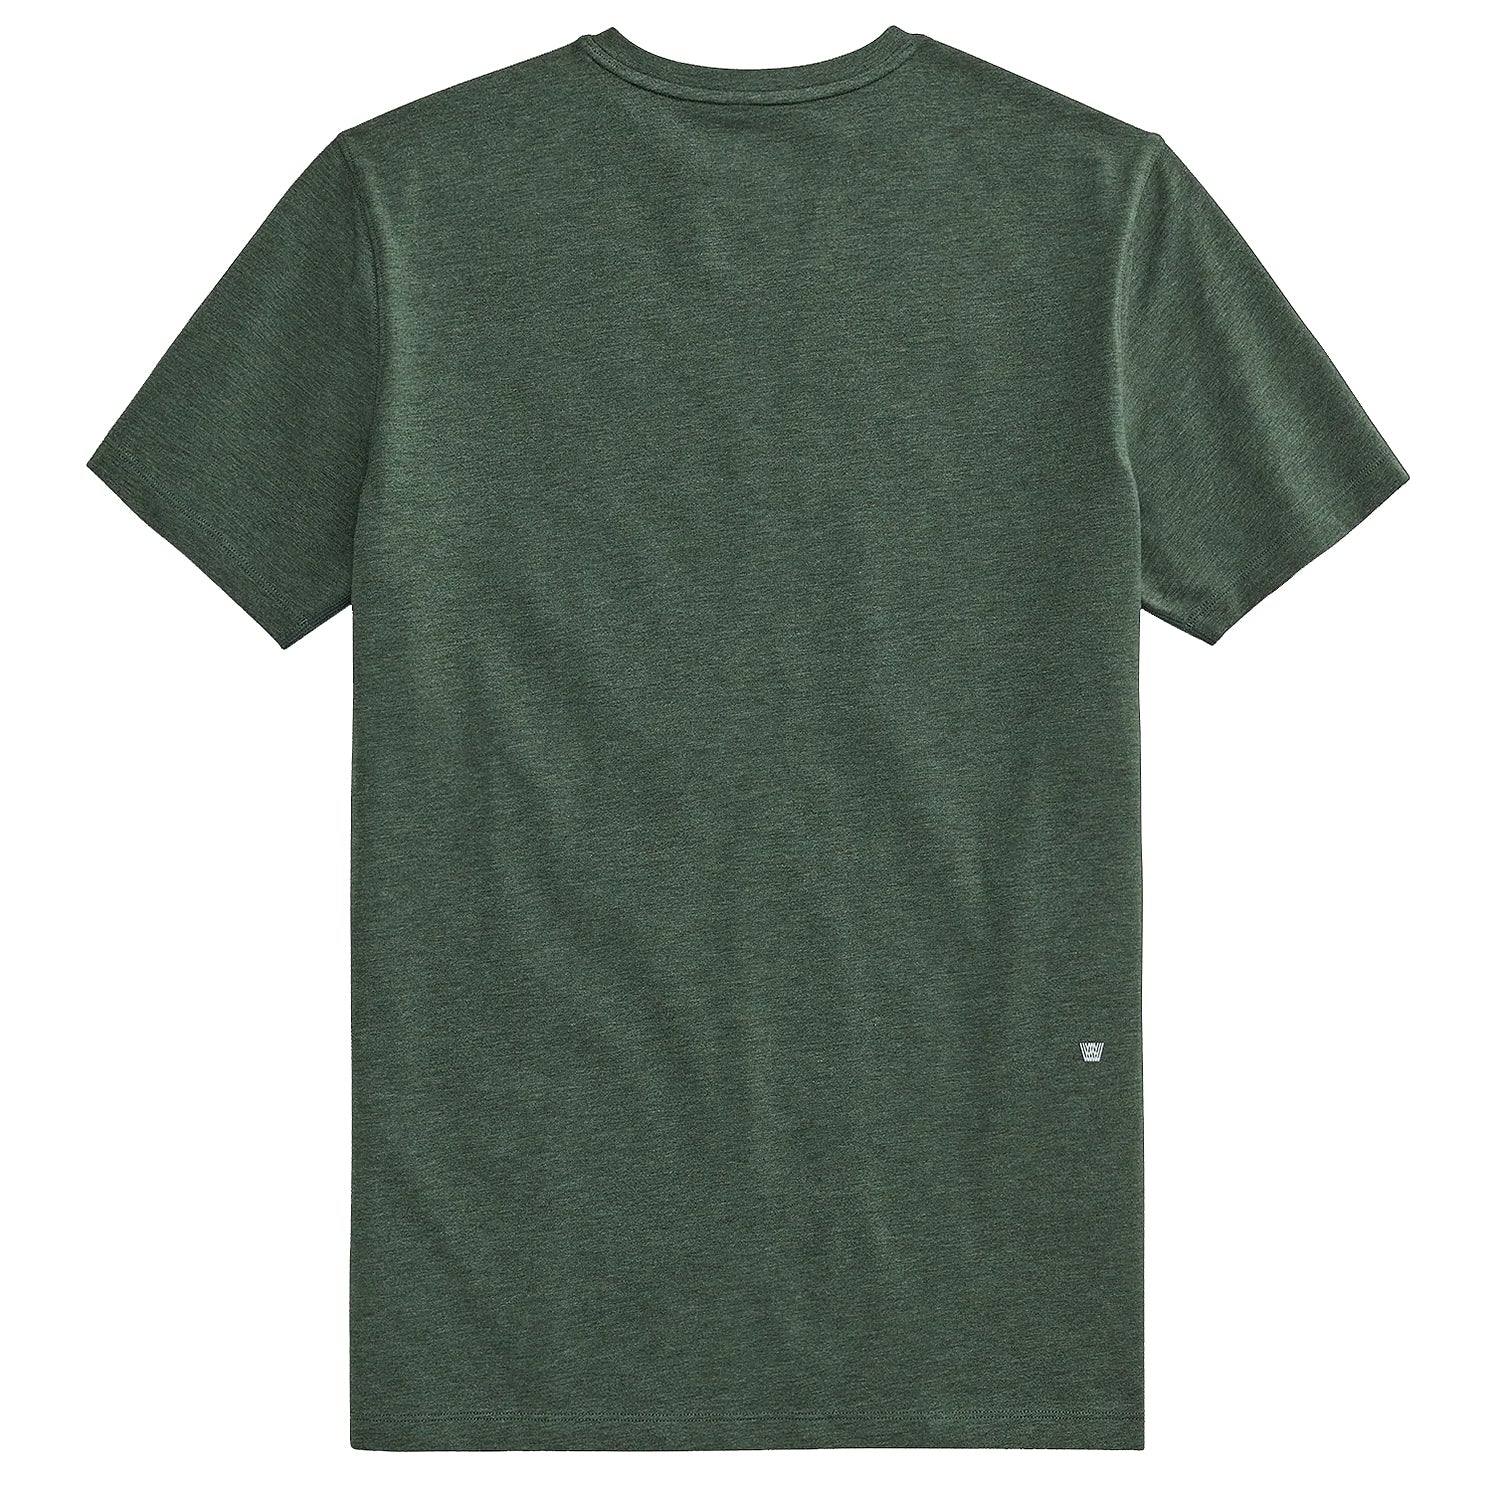 Mack Weldon - &quot;SILVER&quot; V-Neck T-Shirt in Midnight Pine